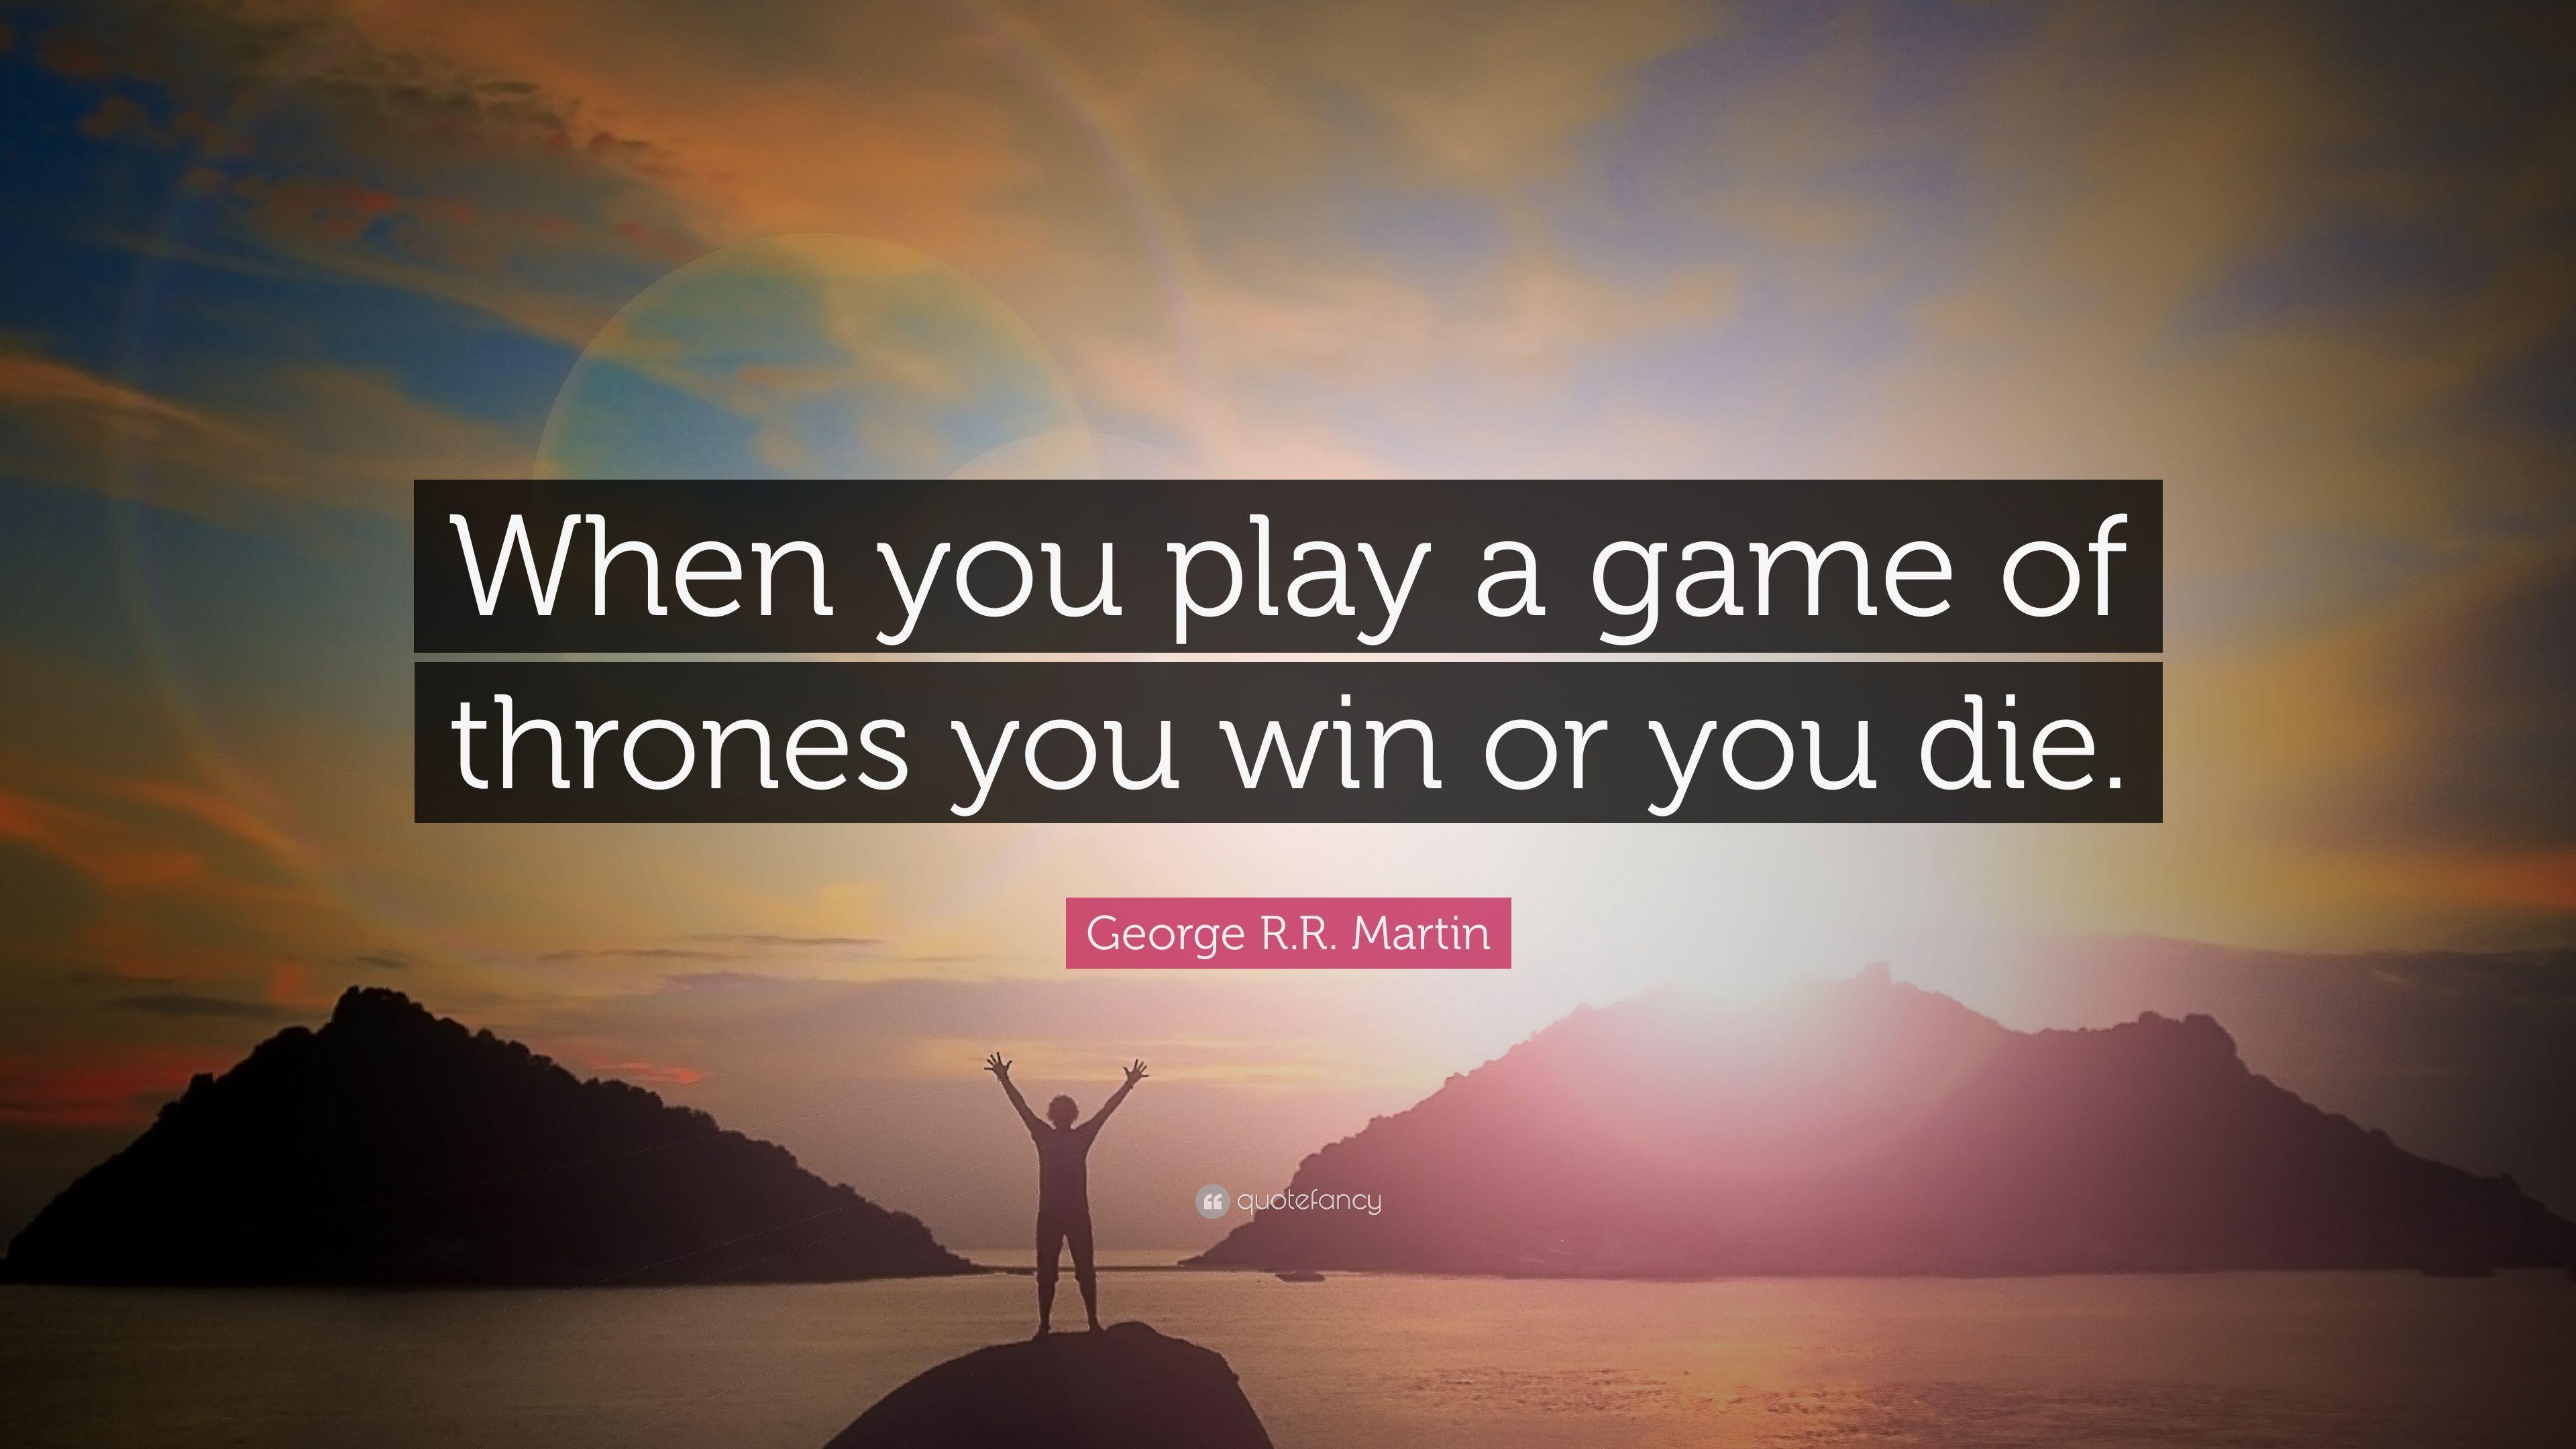 George R.R. Martin Quote: “When you play a game of thrones you win